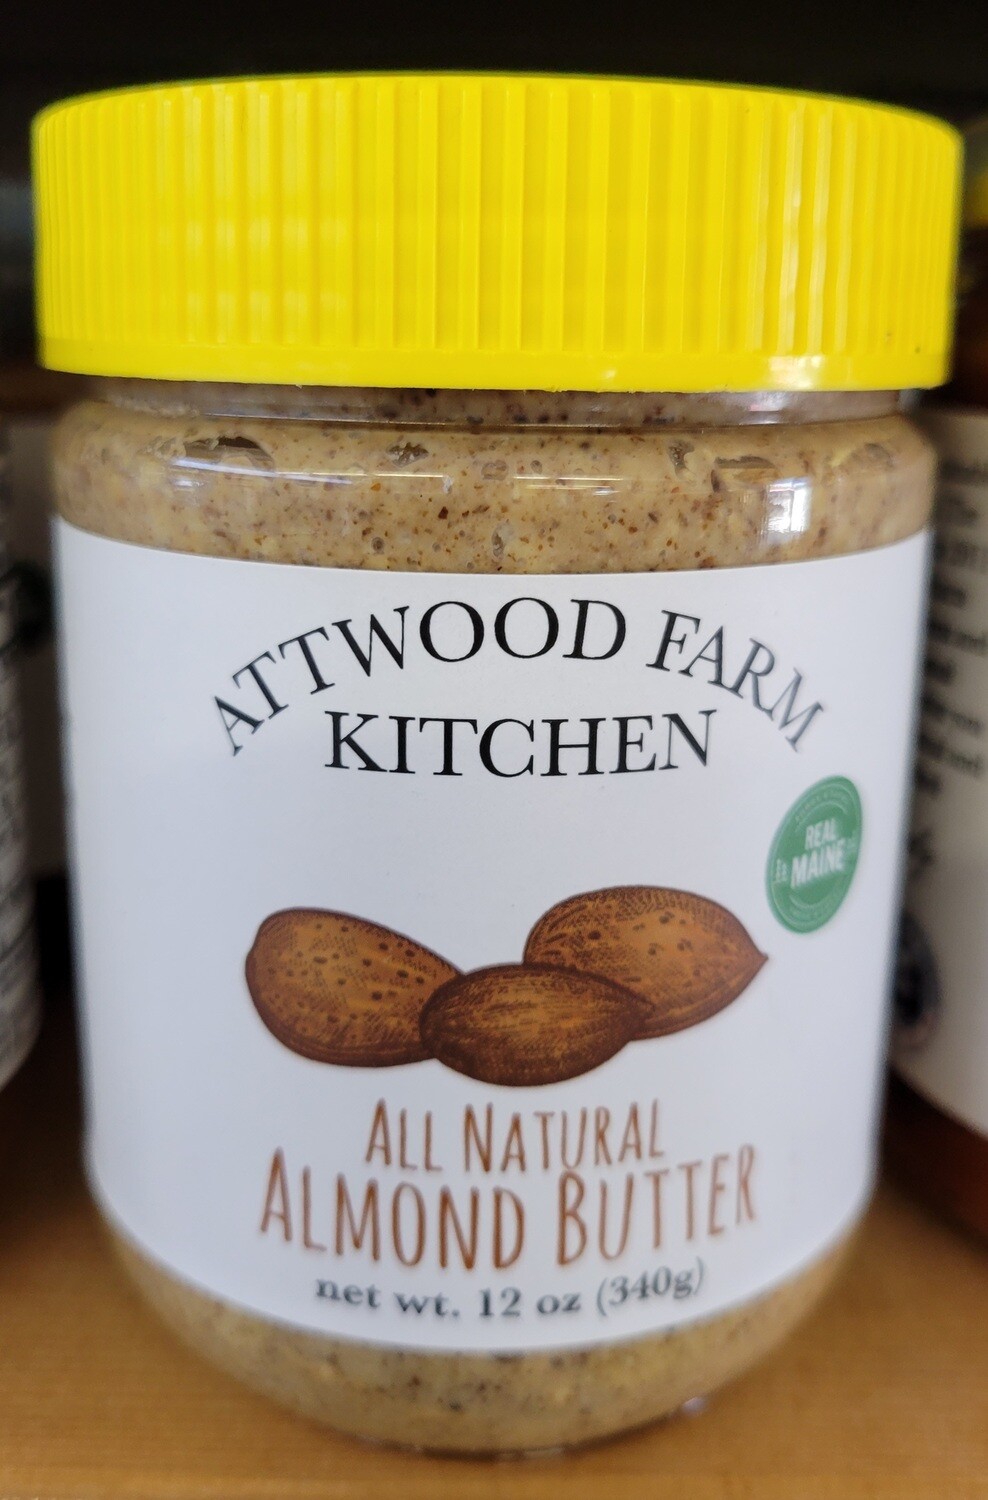 Attwood Farm - All Natural Almond Butter